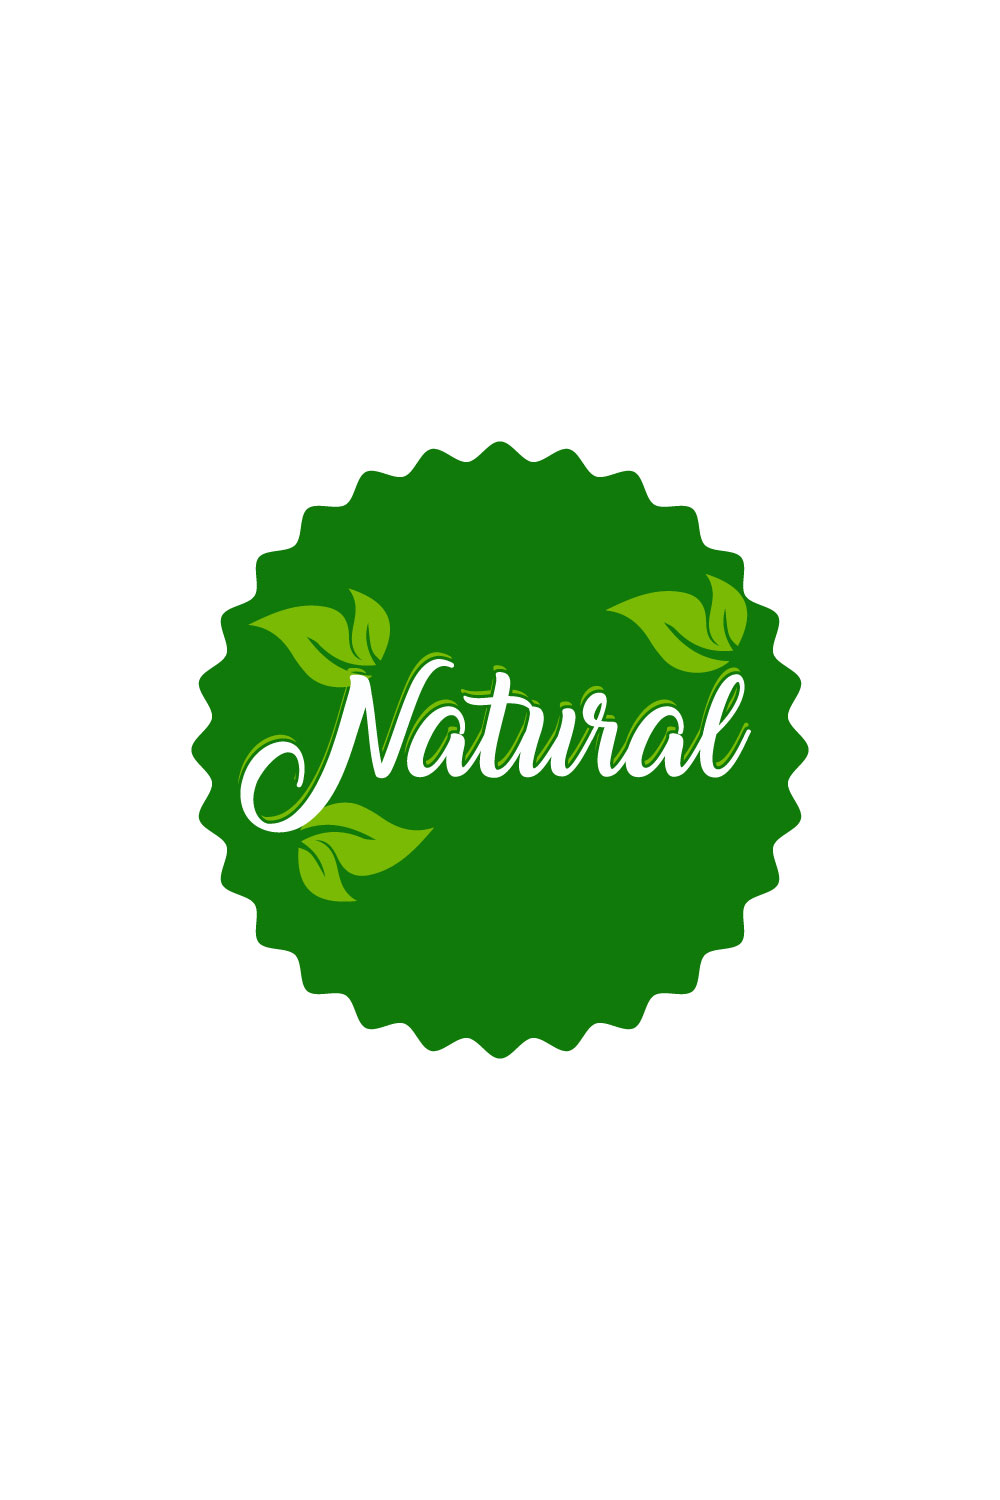 Free nutrition logo pinterest preview image.